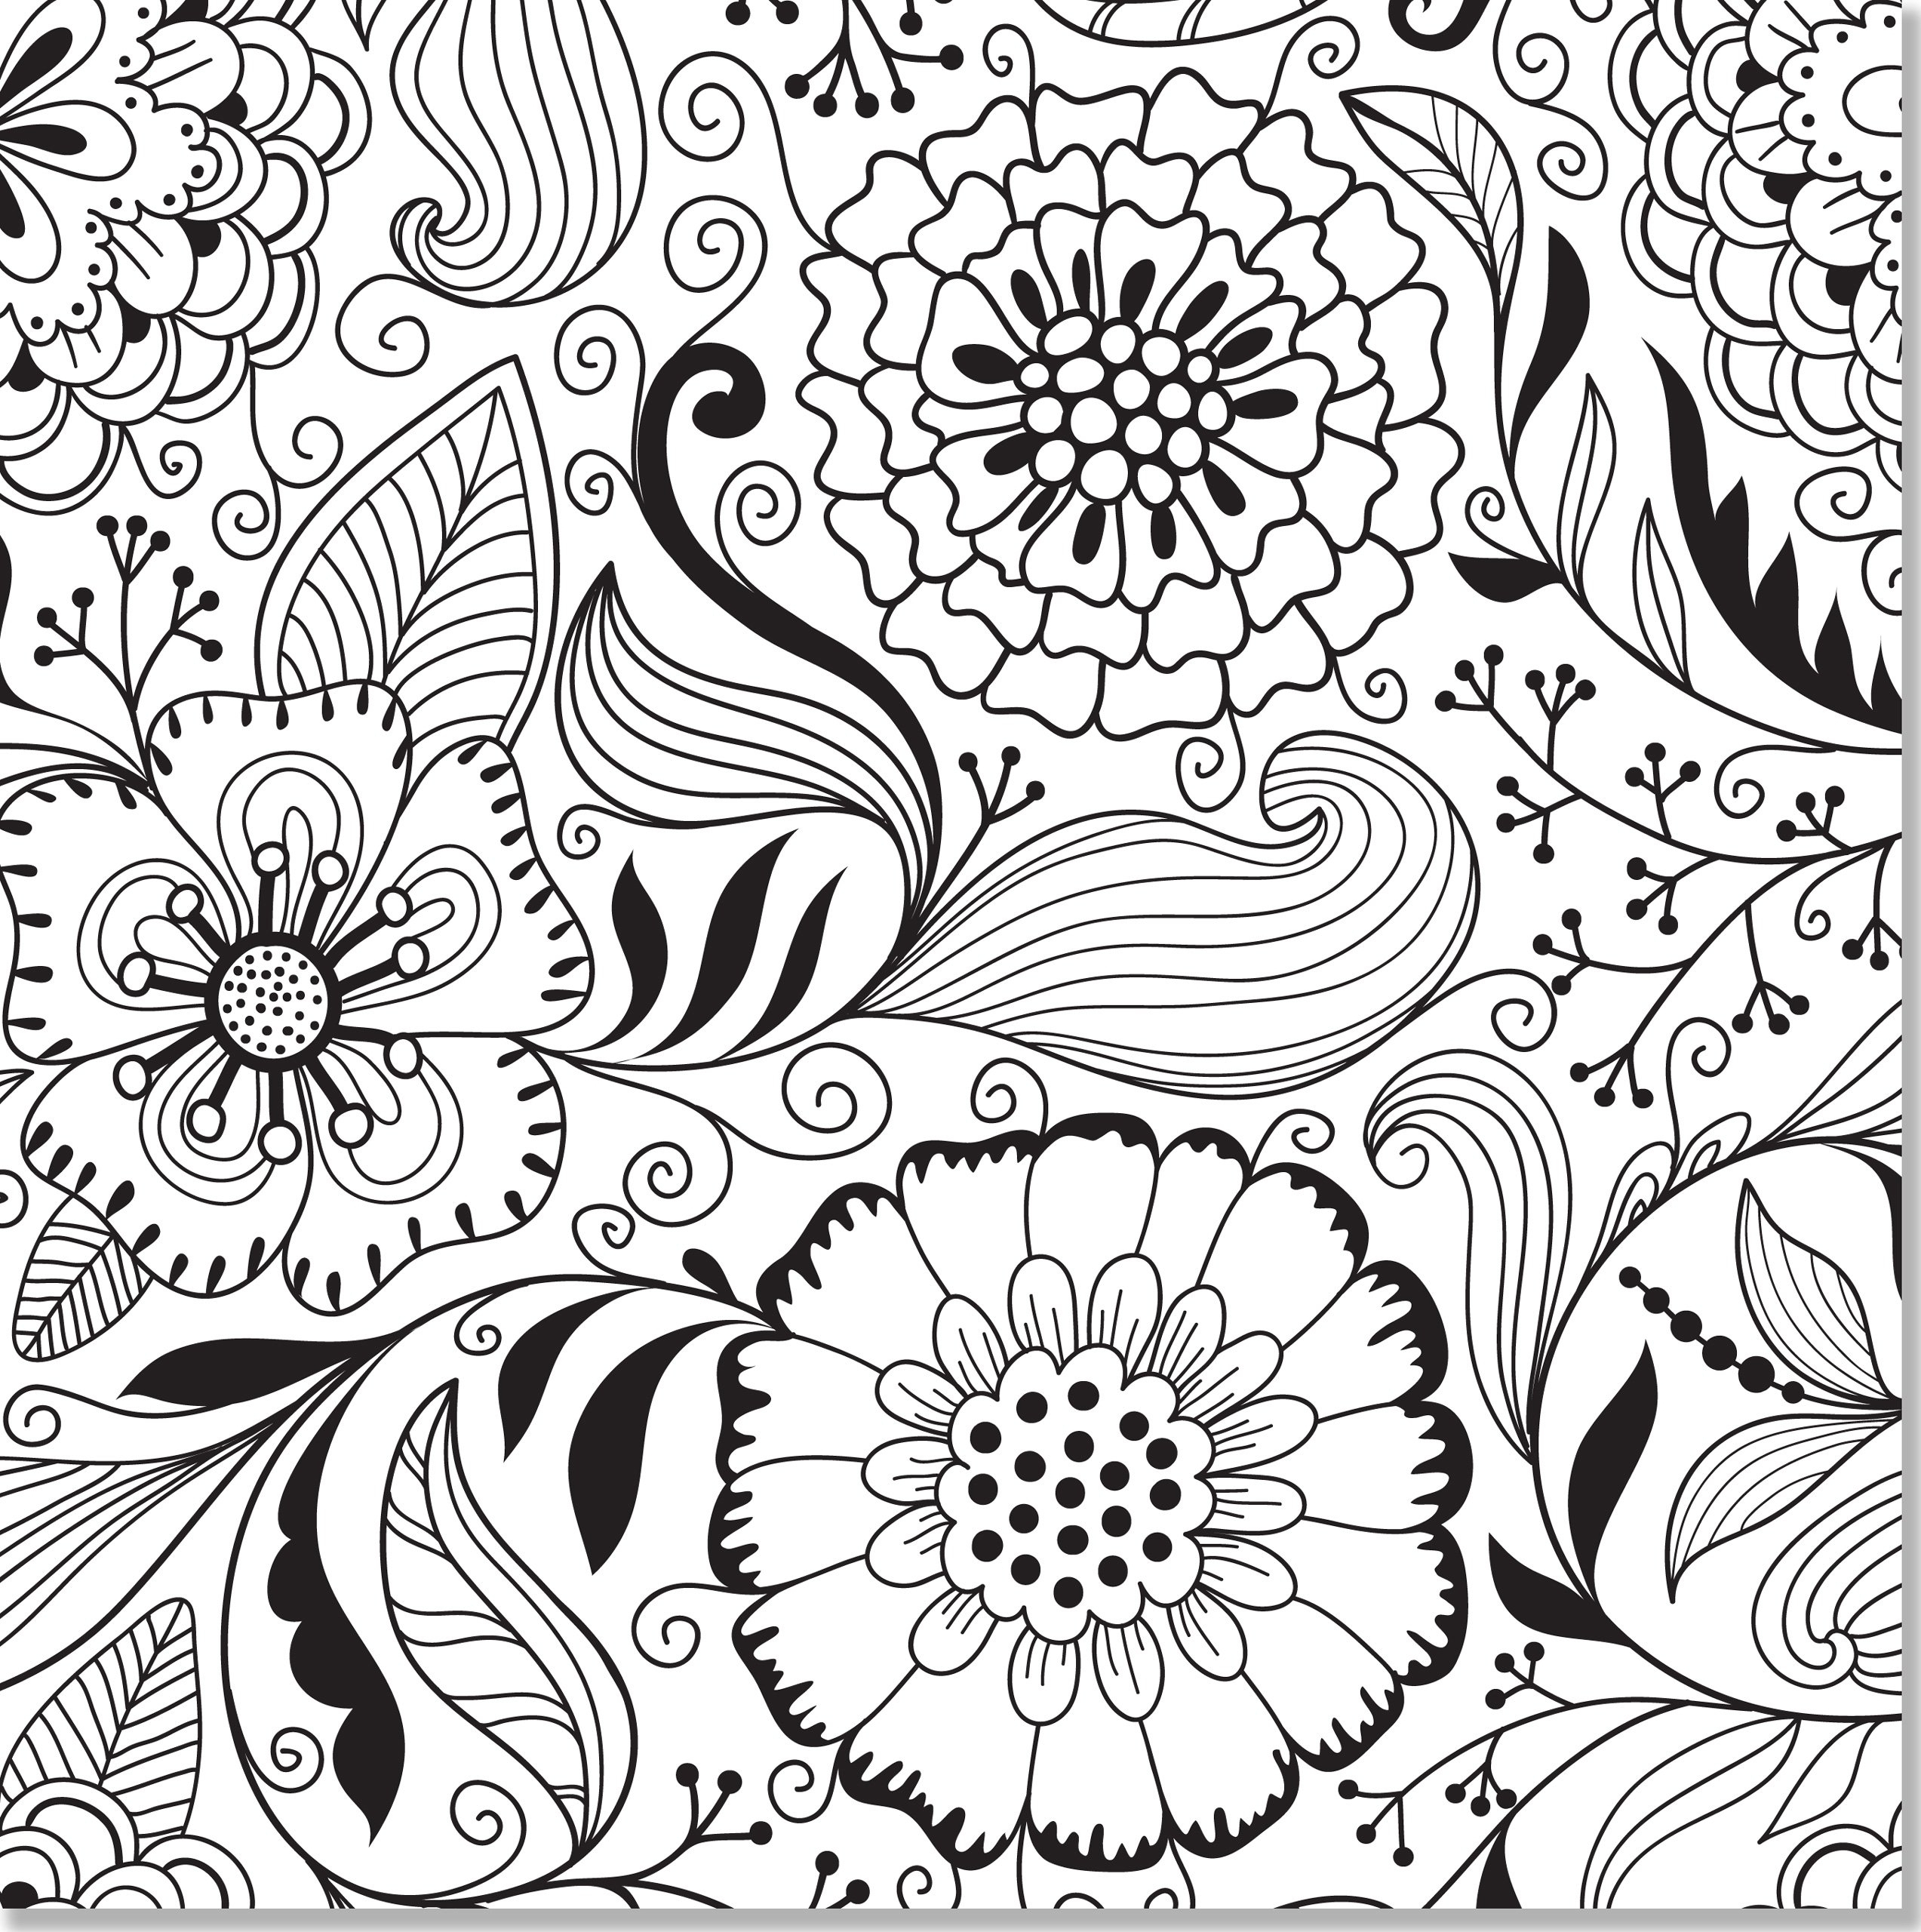 Coloring Pages : Free Printable Coloring Pages For Adults Advanced - Free Printable Coloring Pages For Adults Advanced